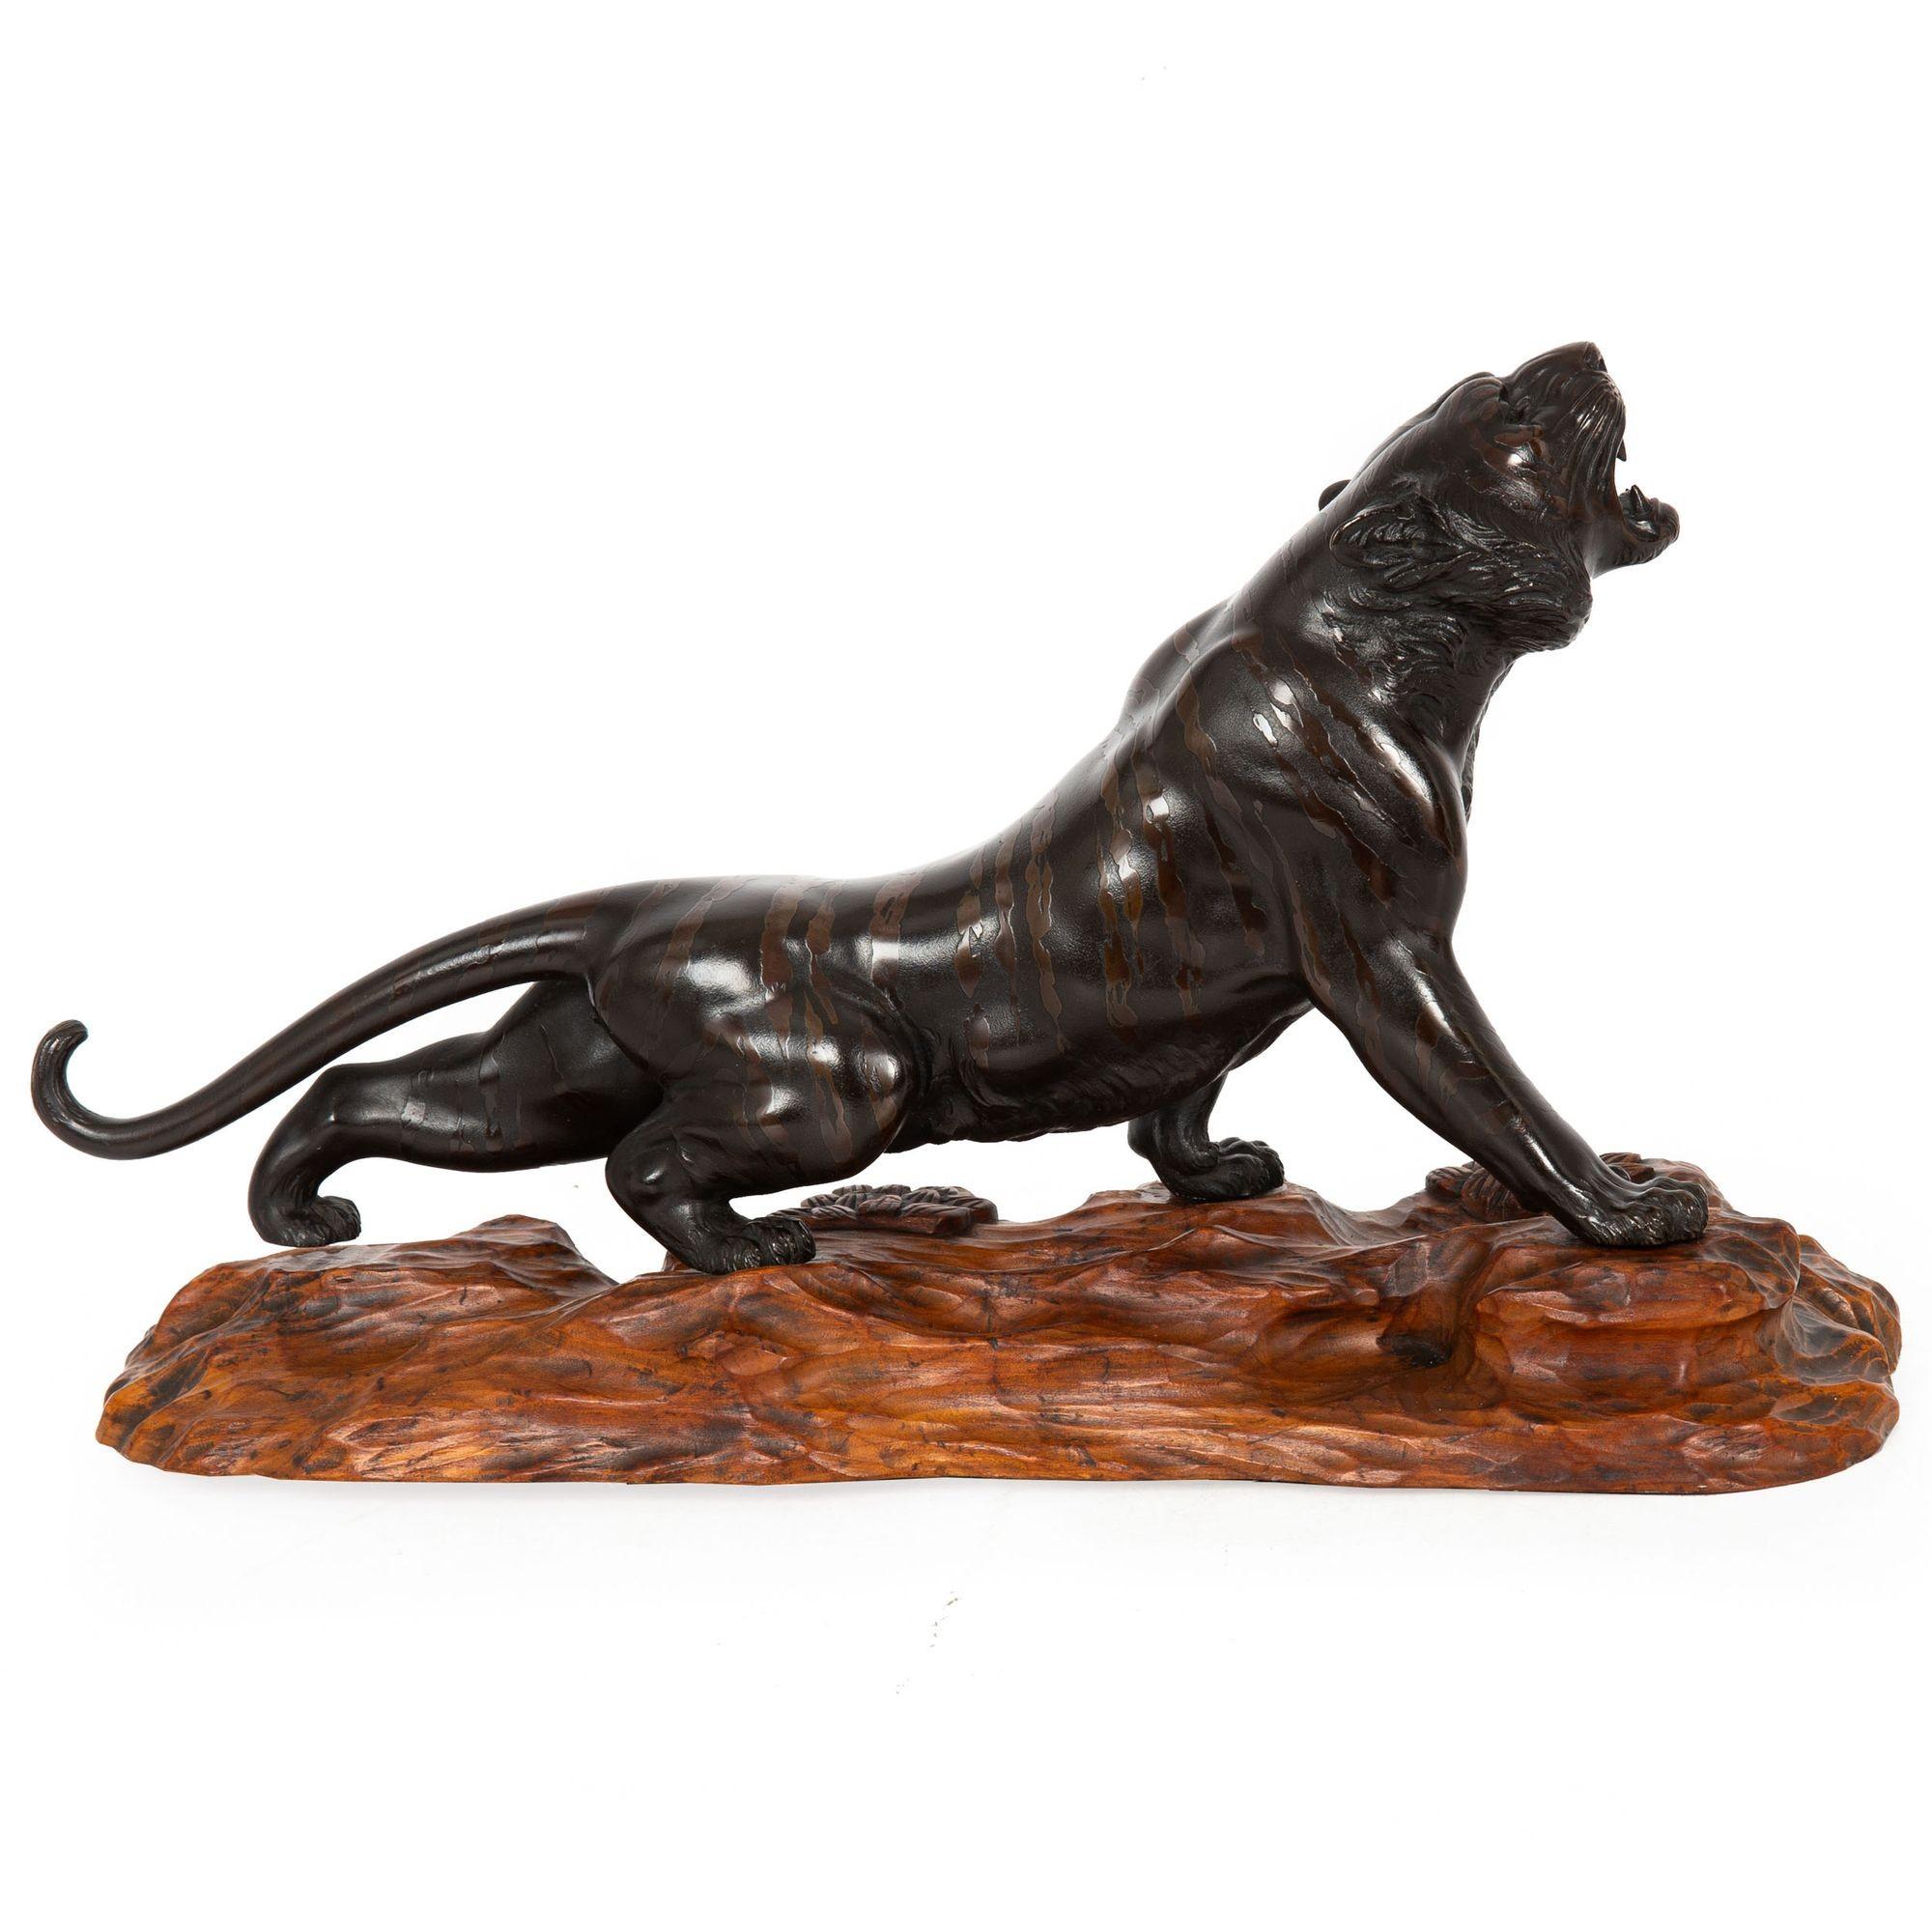 OKIMONO OF A ROARING TIGER OVER A WOODEN BASE
Japan, Meiji Period  Patinated bronze  signed Mitani to underside of belly

Item # 302LOC16P 

This remarkable Japanese bronze okimono of a Roaring Tiger from the Meiji period exemplifies exceptional